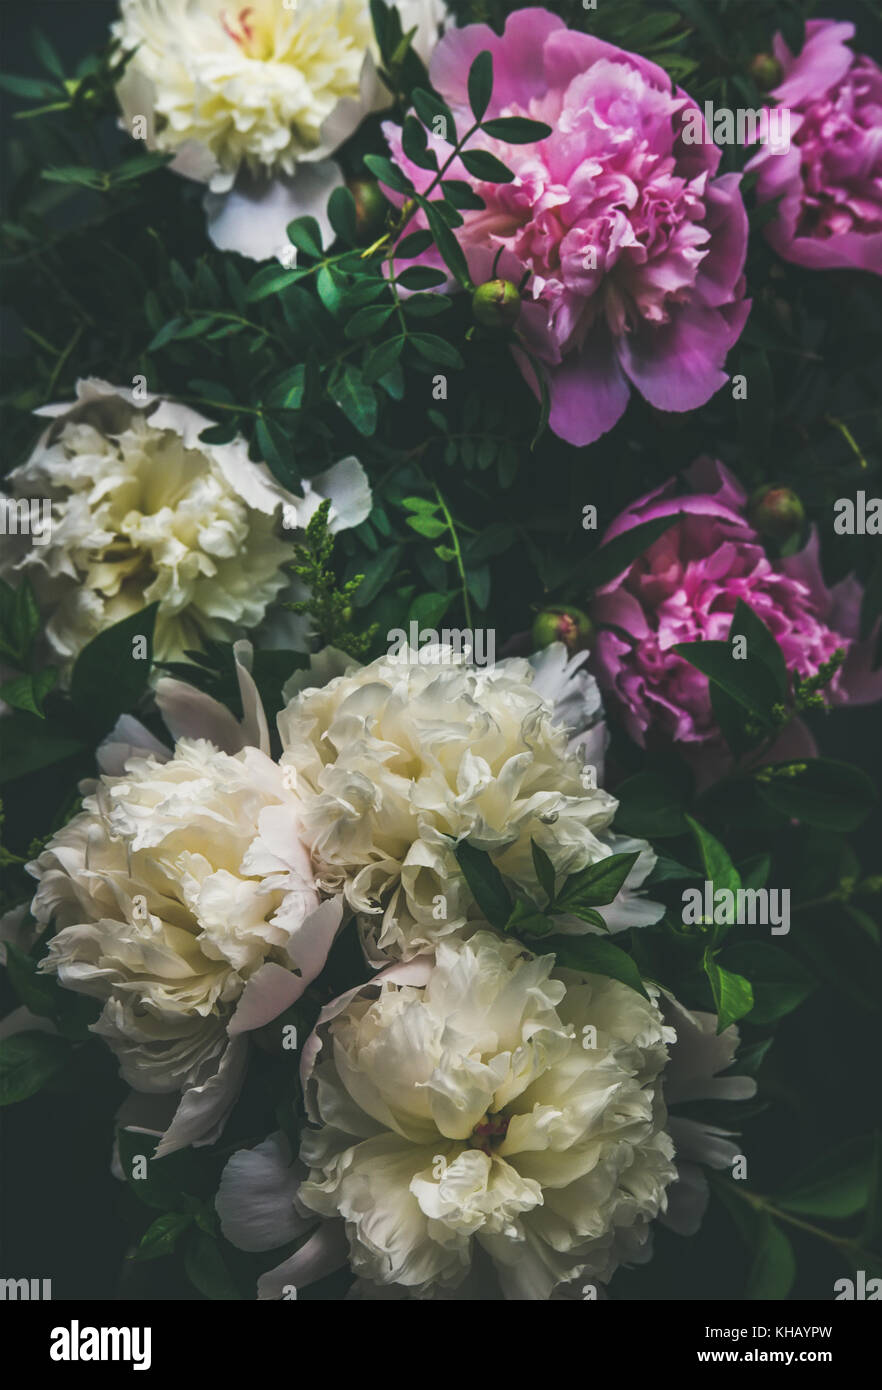 white and pink peony flowers over dark background top view KHAYPW